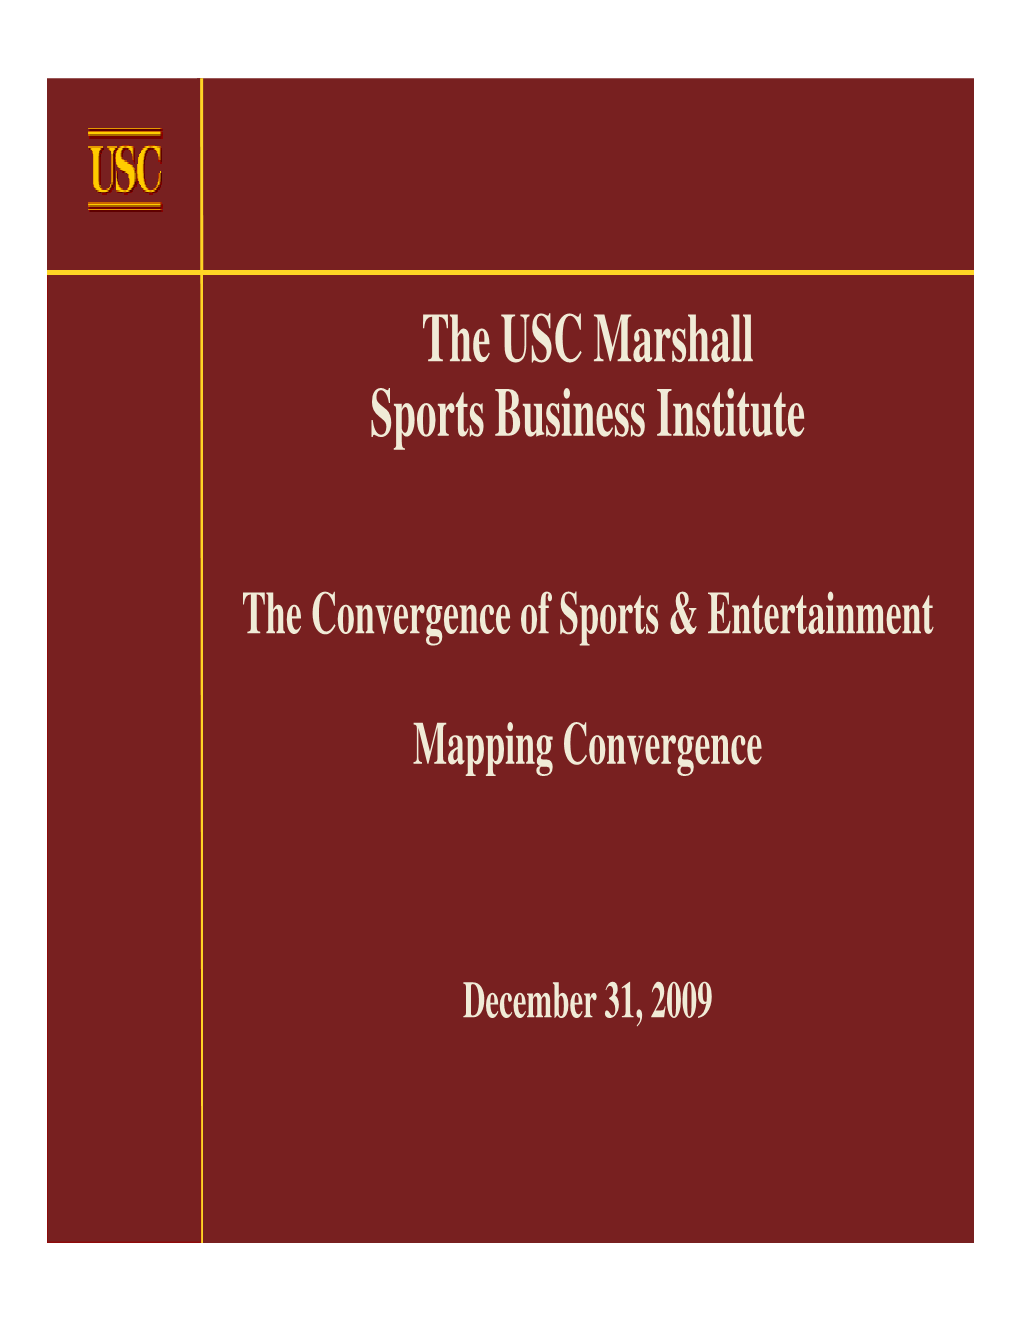 The USC Marshall Sports Business Institute